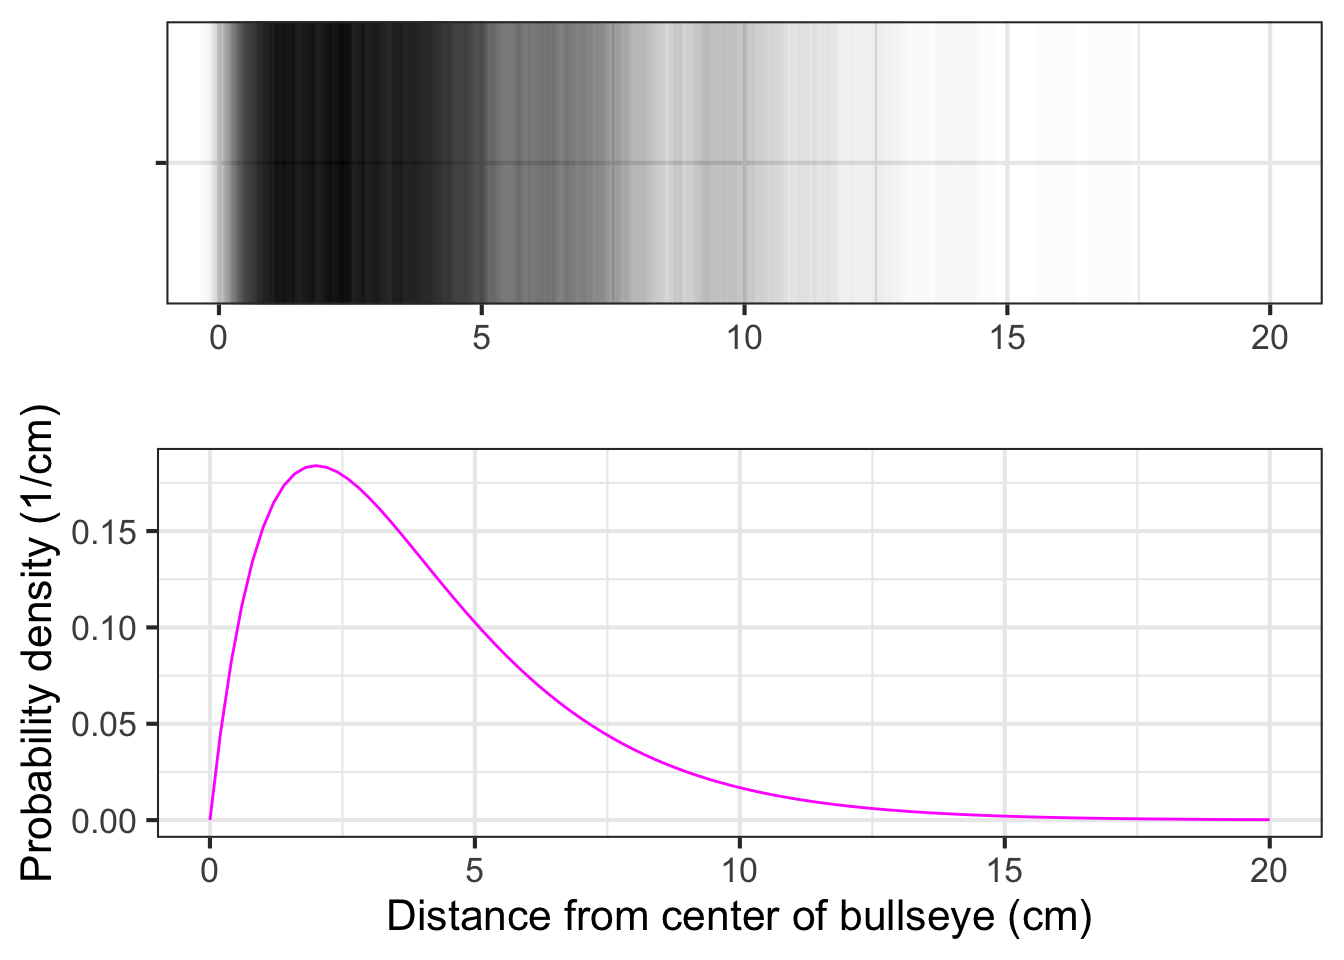 Showing a probability density function for the dart distance in two modes: 1) an ordinary function graph and 2) the density of ink.